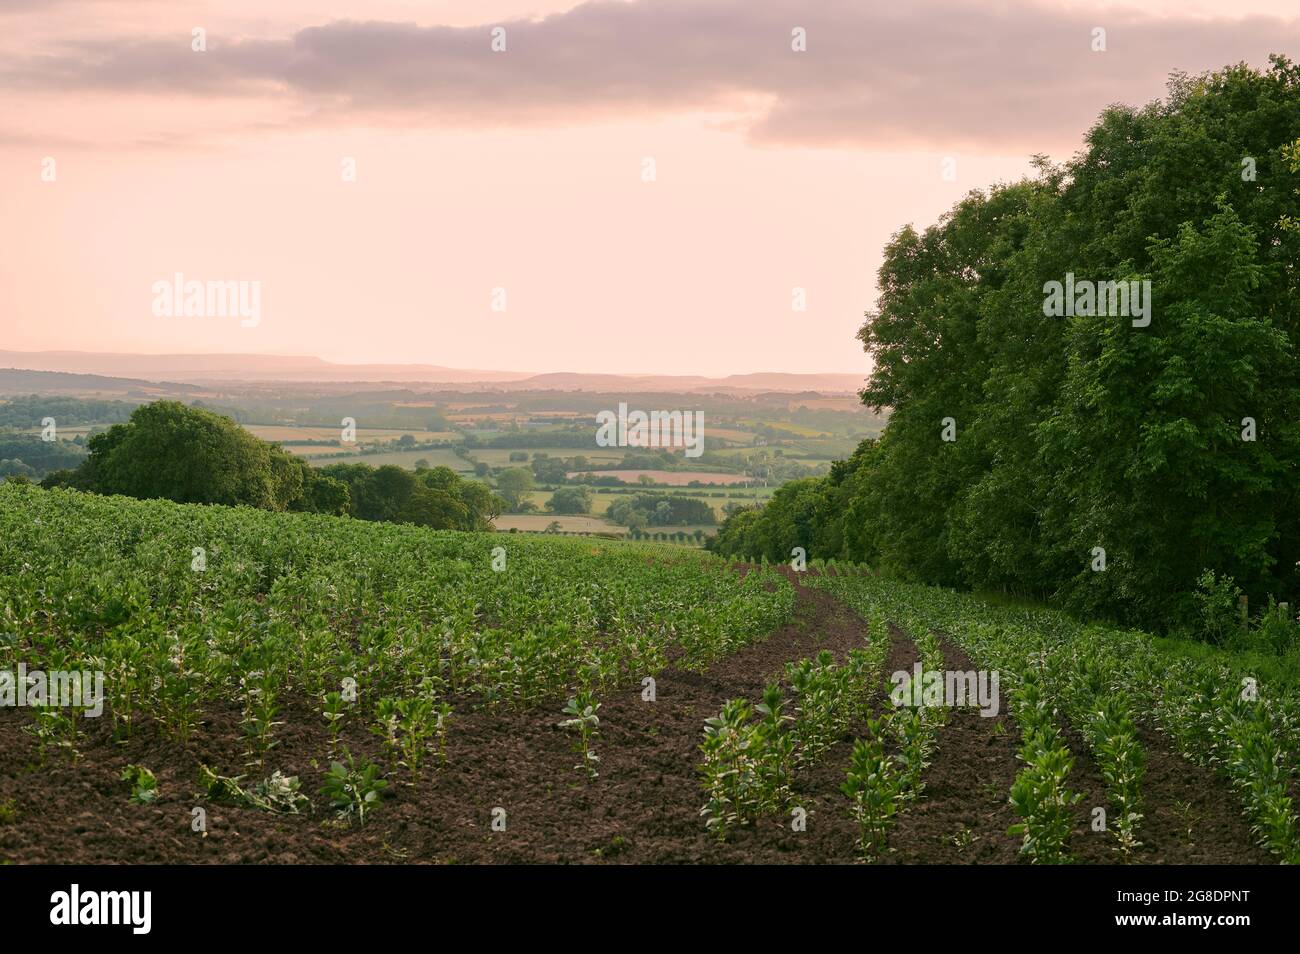 Agriculture arable field in english countryside in summer with blue sky in the evening with trees and hedges Stock Photo